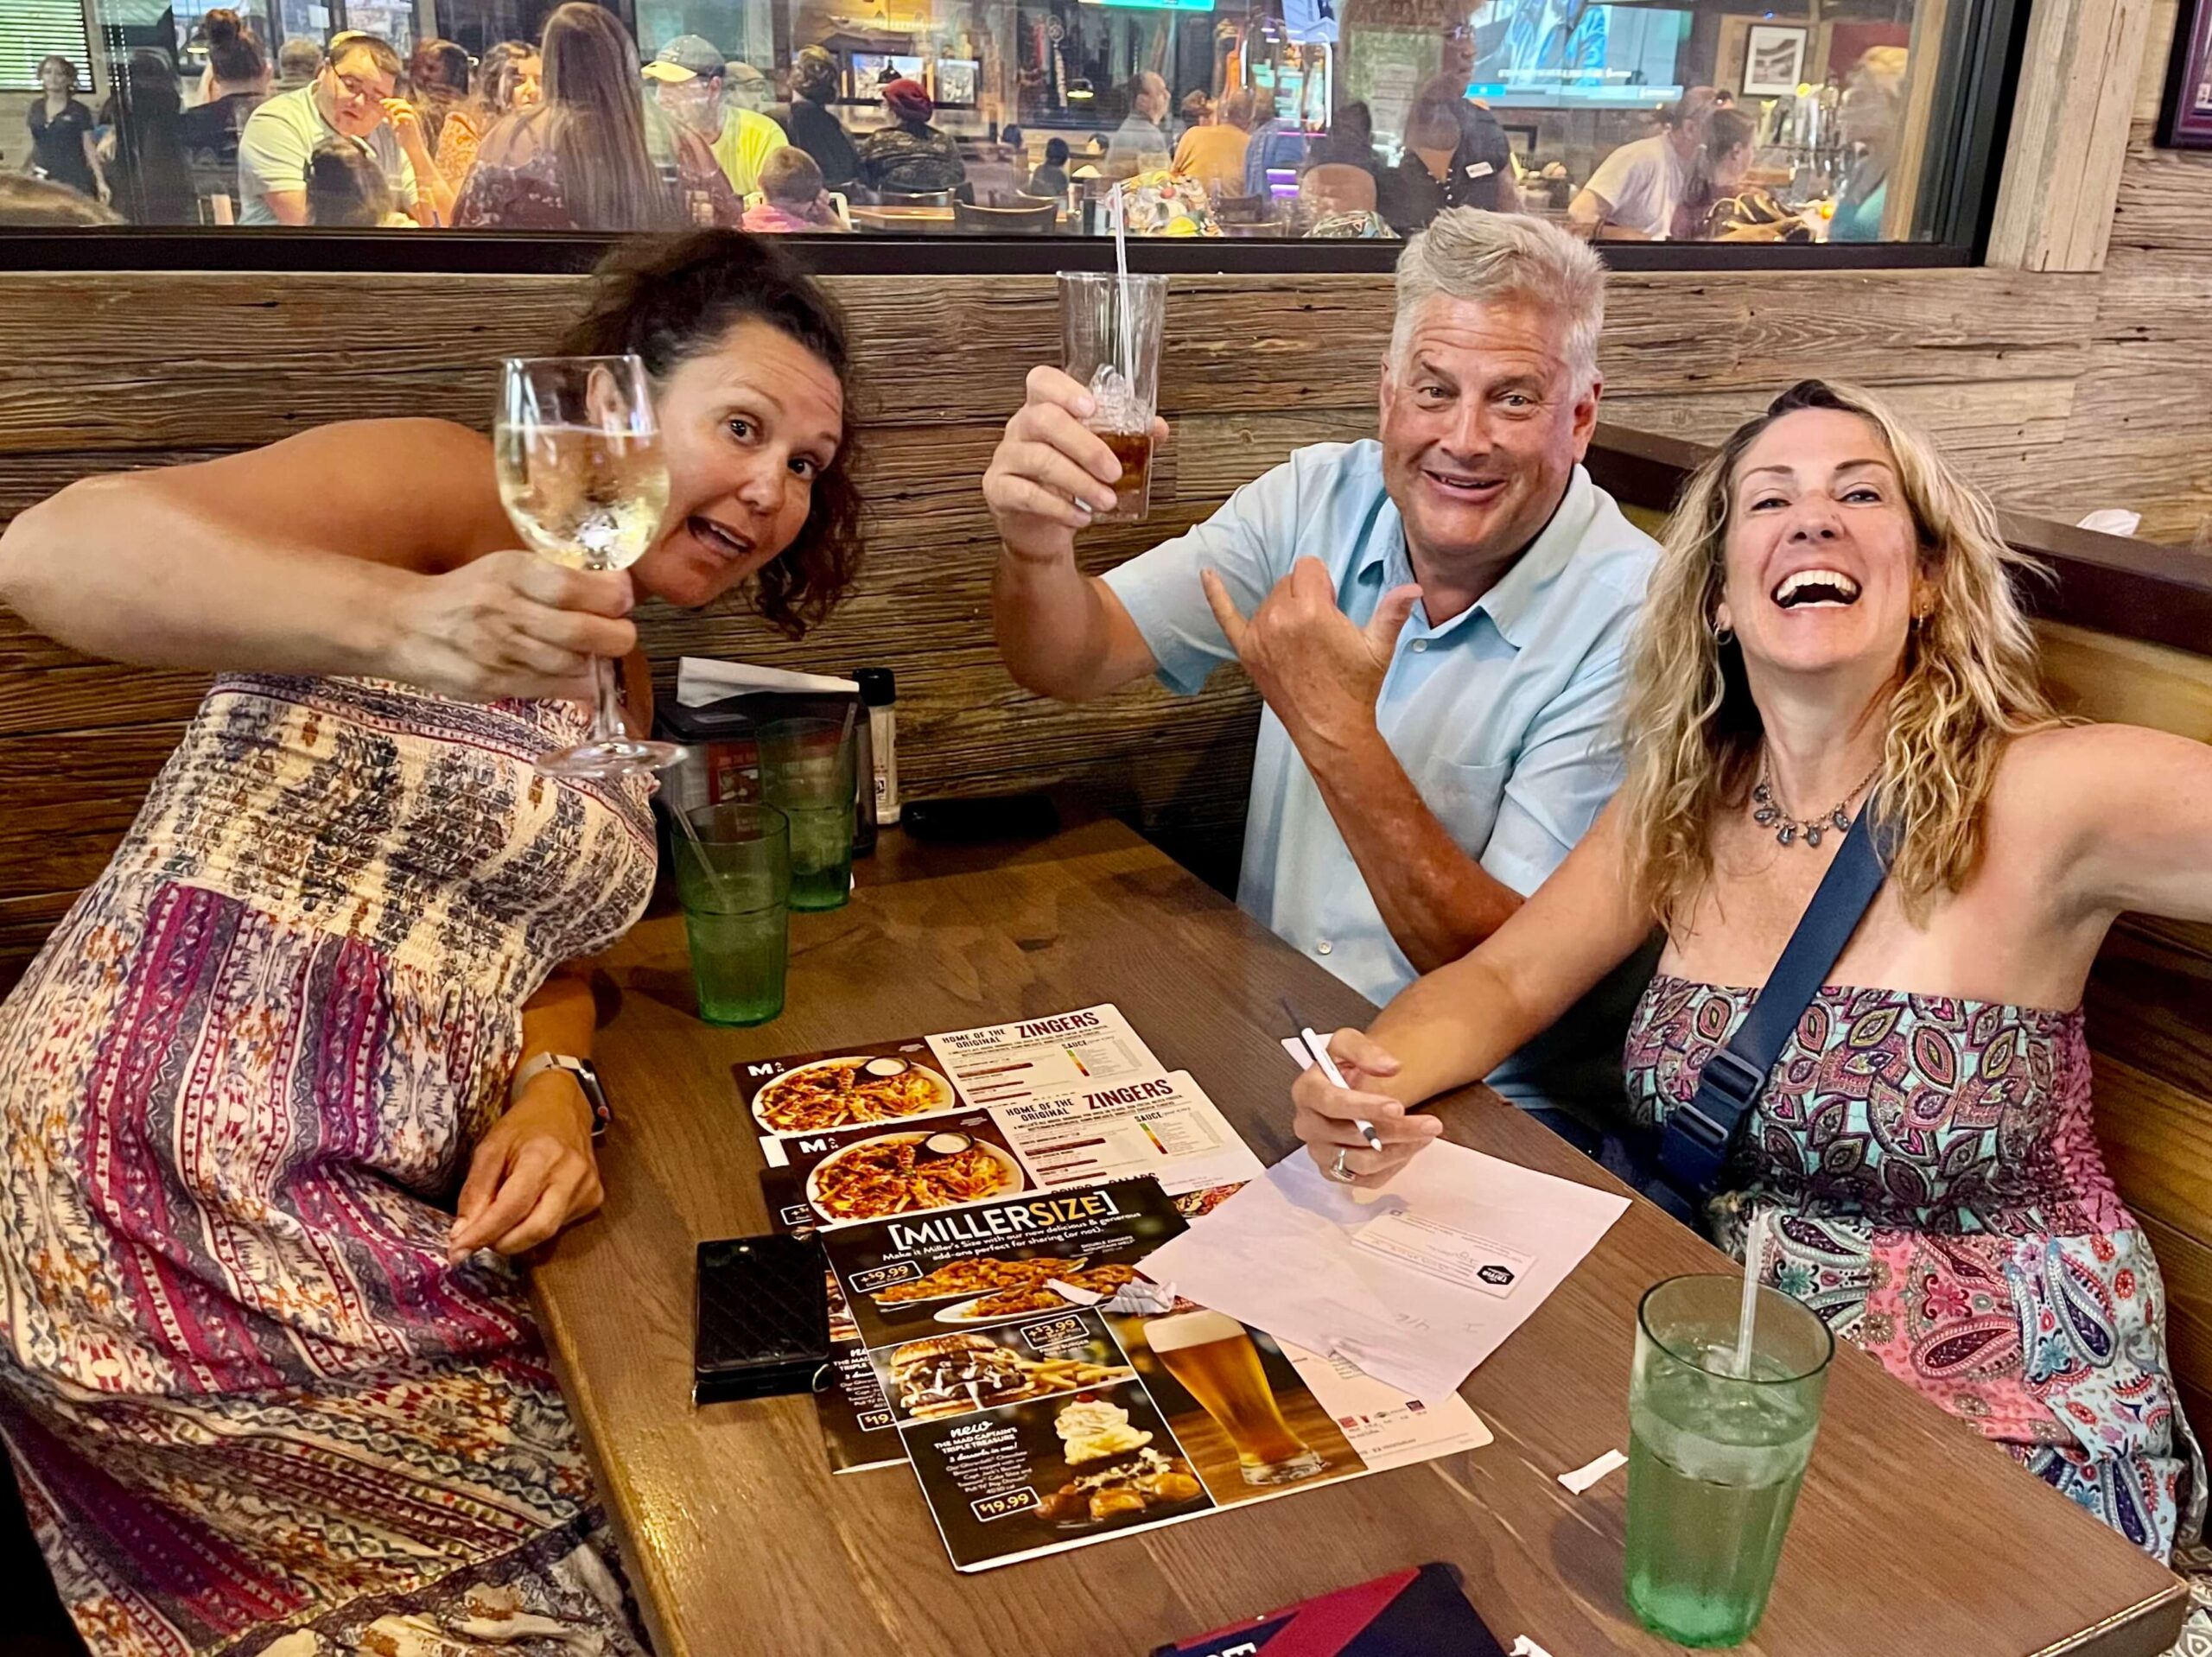 Miller's Ale House Jacksonville FL 32256 trivia night: two women and a man seated at a booth celebrating and having fun while raising their glasses with Miller's Ale House menus on the table between them